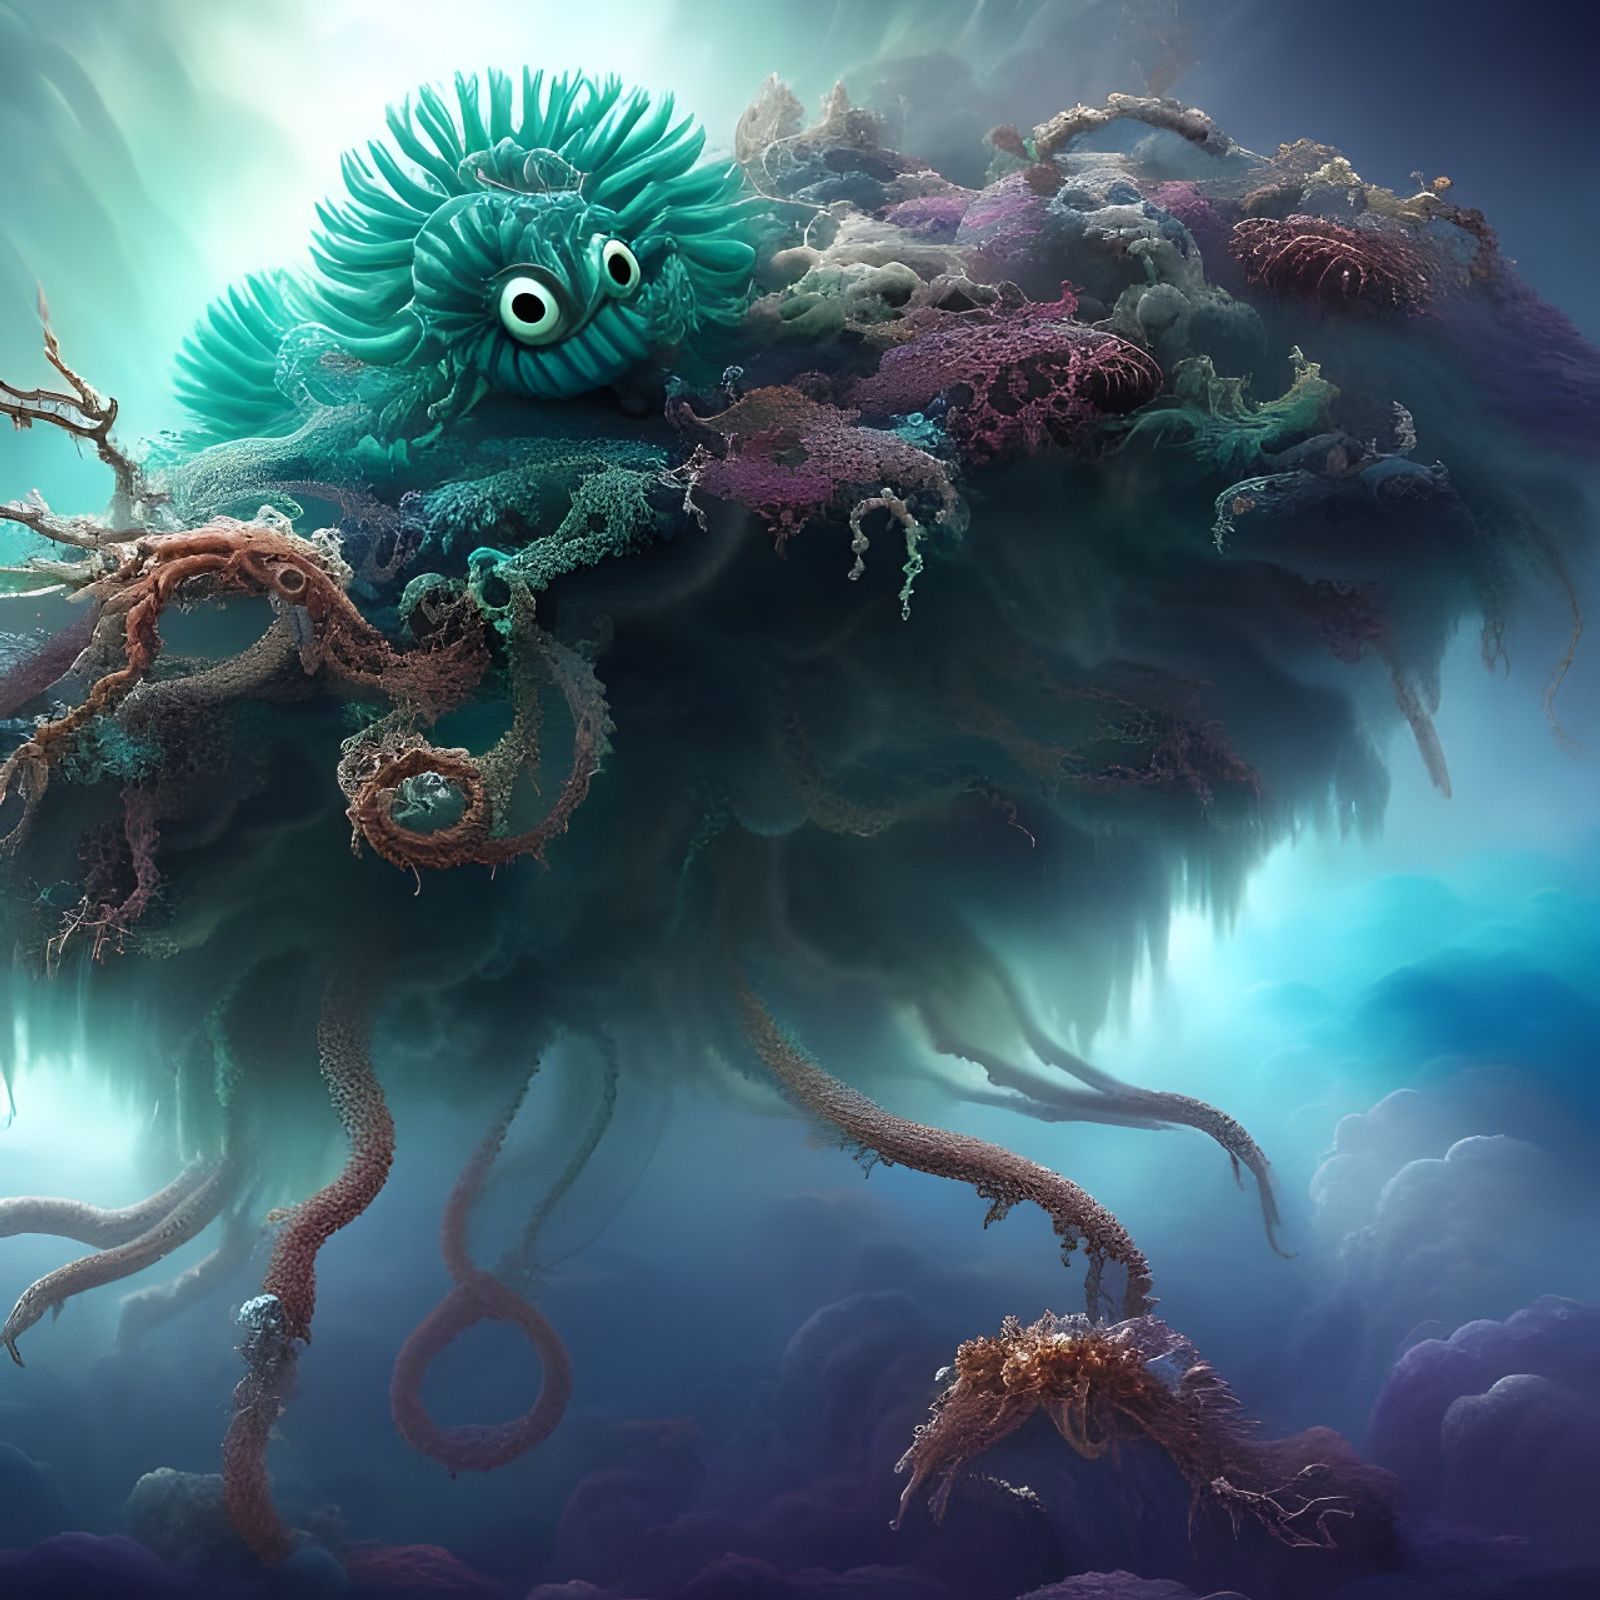 real mythical sea creatures